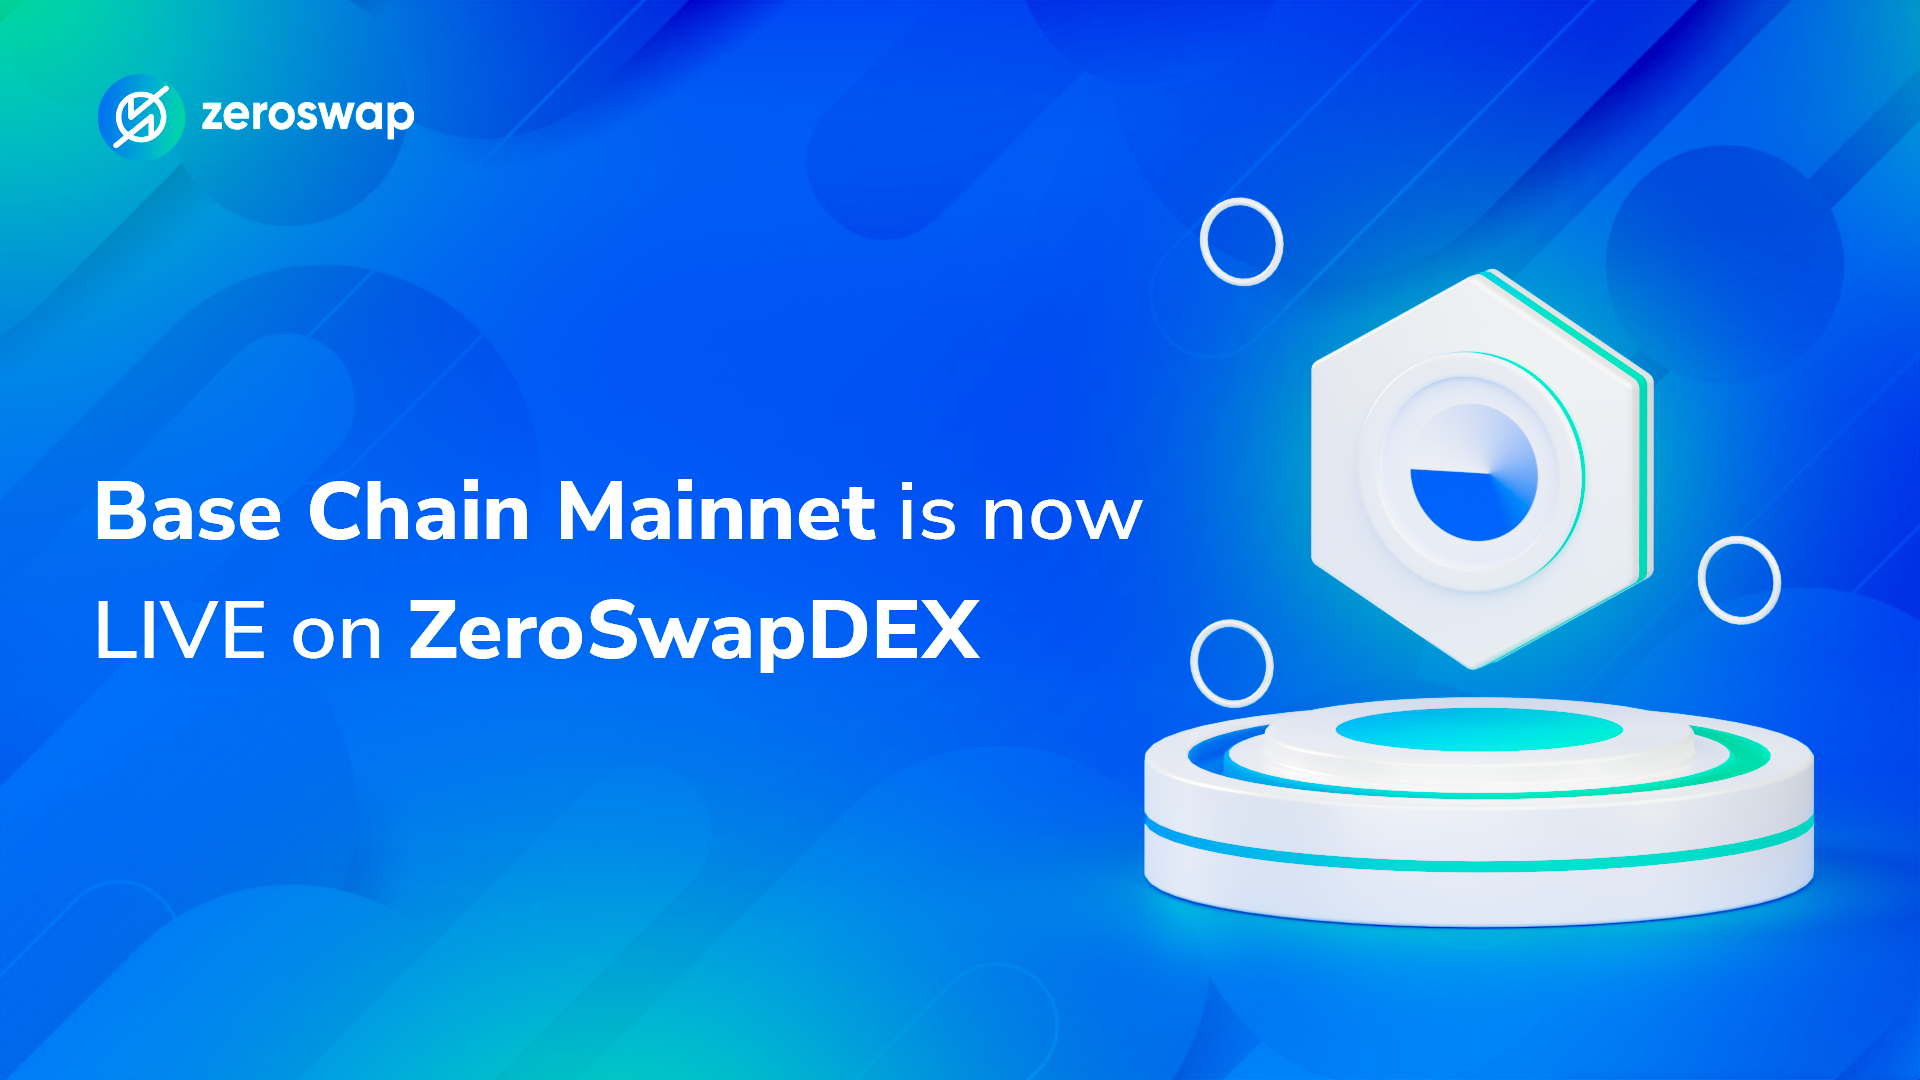 Base Chain Mainnet is now Live on ZeroSwapDEX